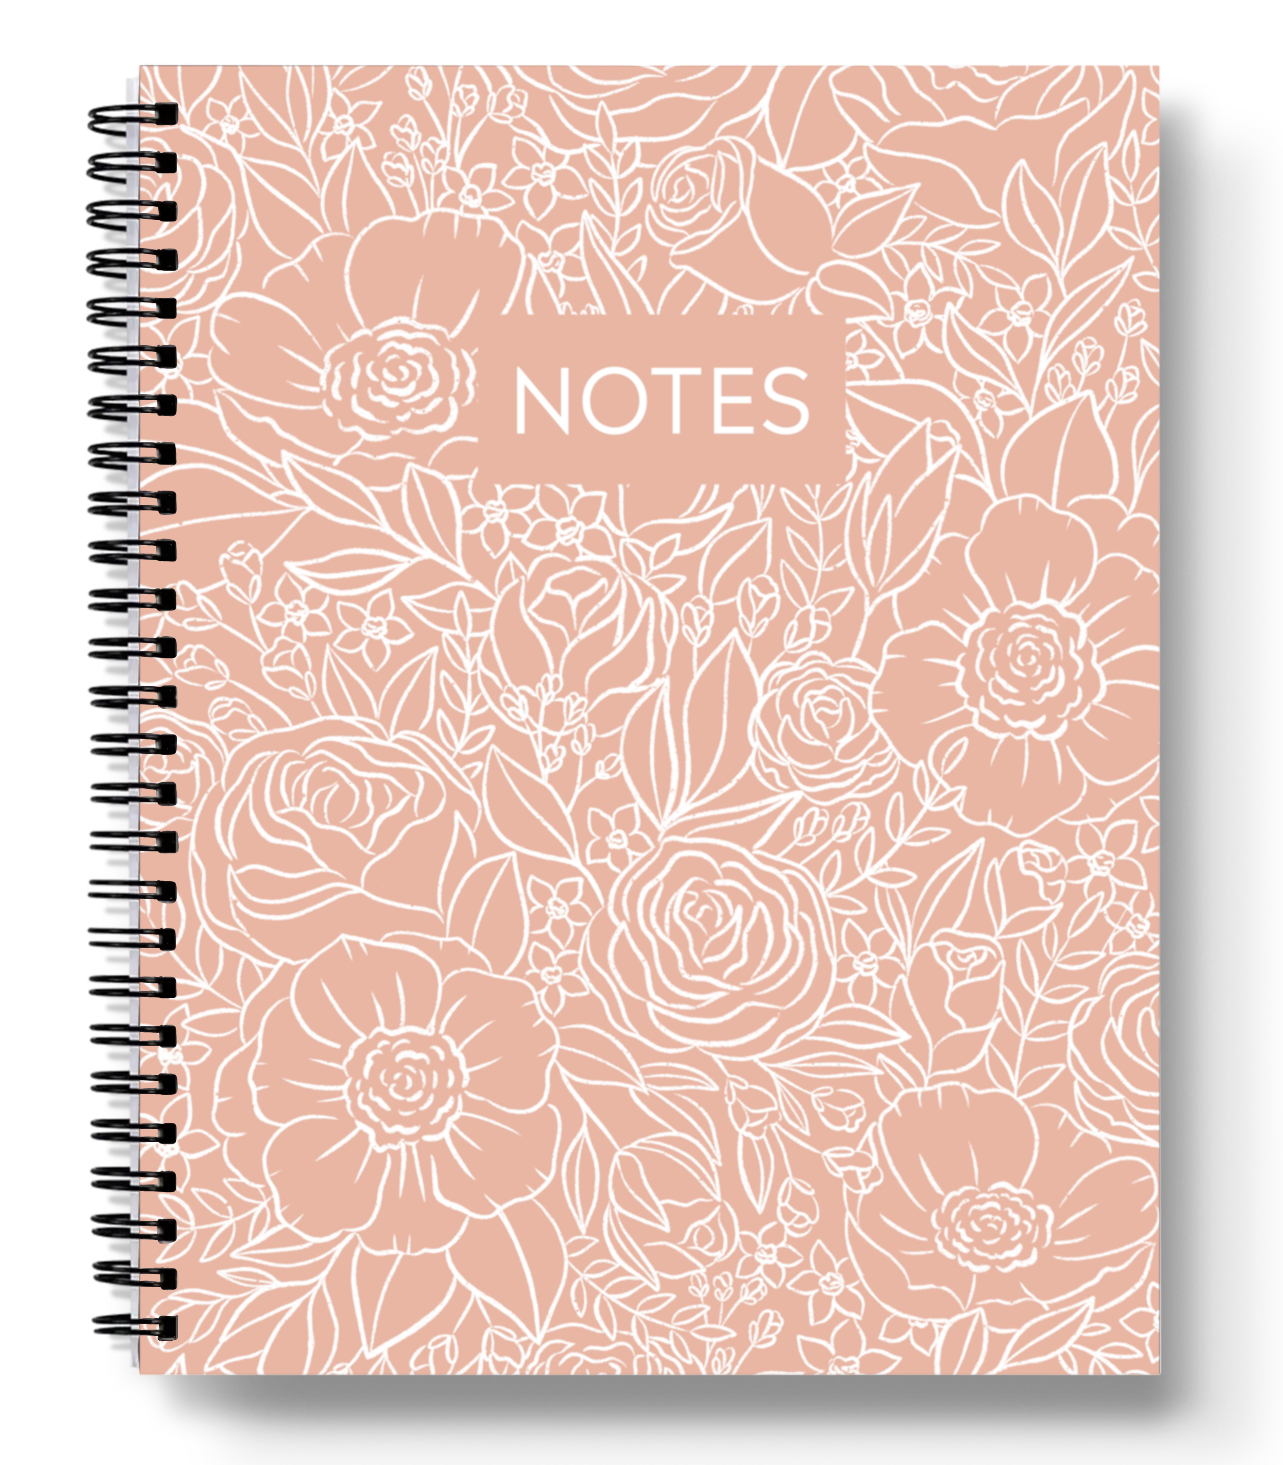 Notebook, Floral Notes Spiral Lined 8.5x11in.